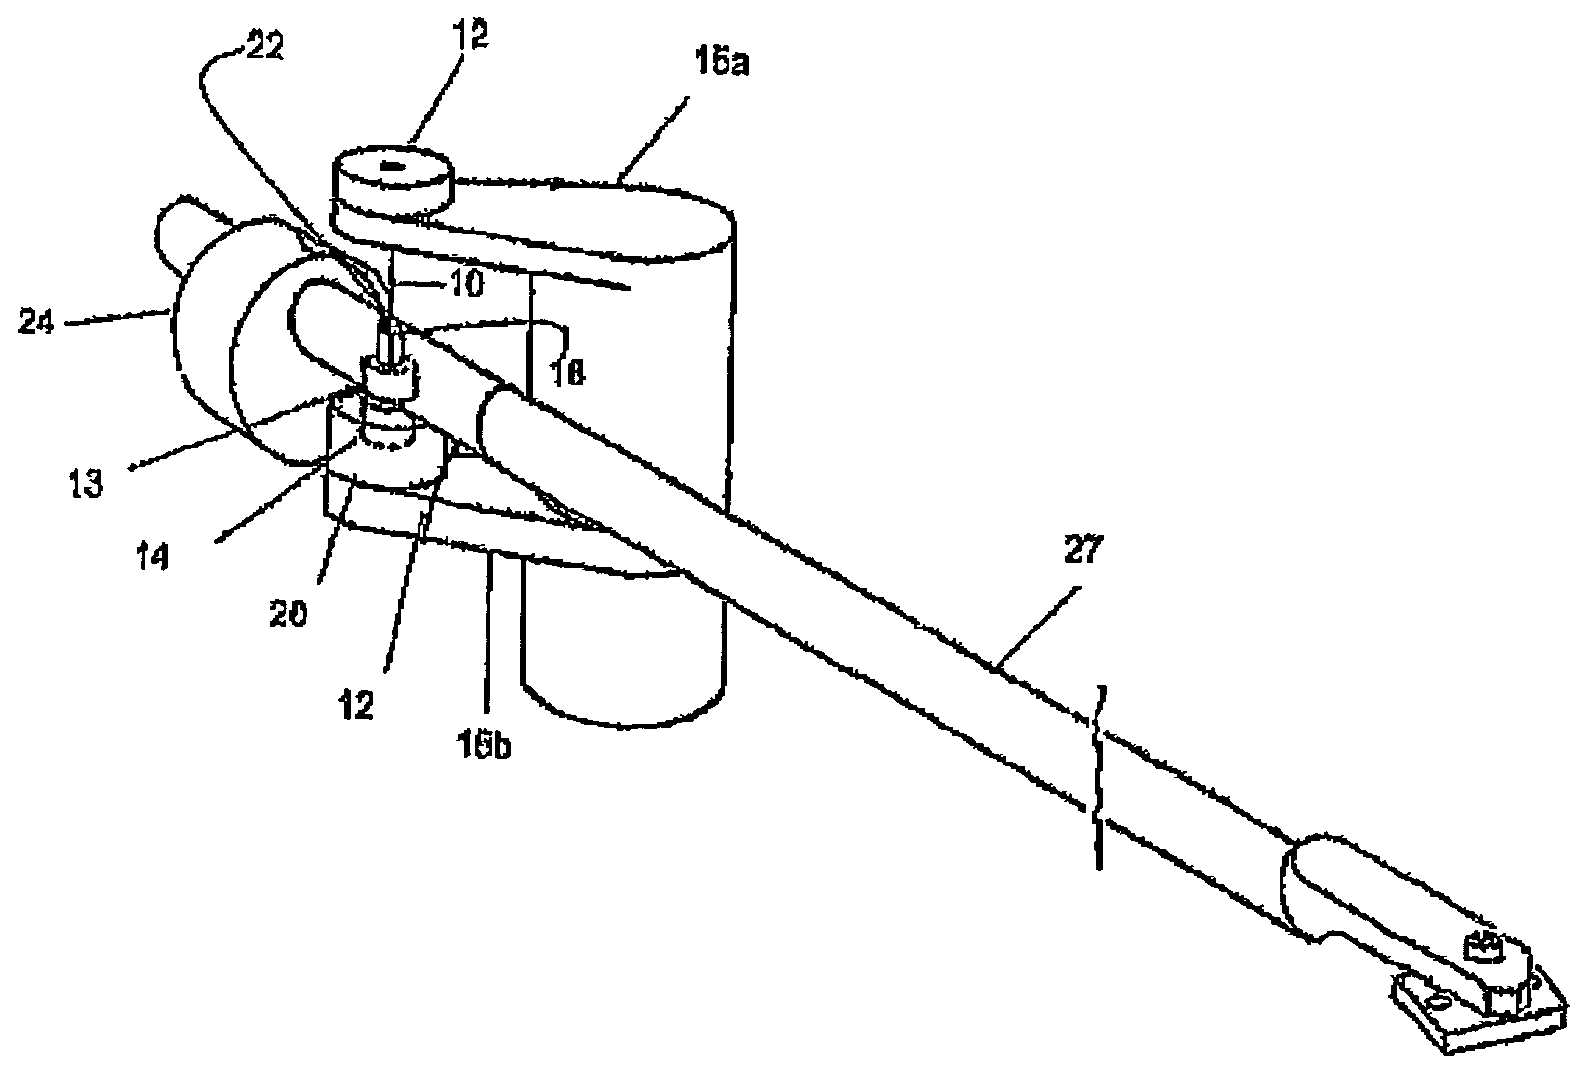 Spring-suspension magnetically stabilized pick-up arm